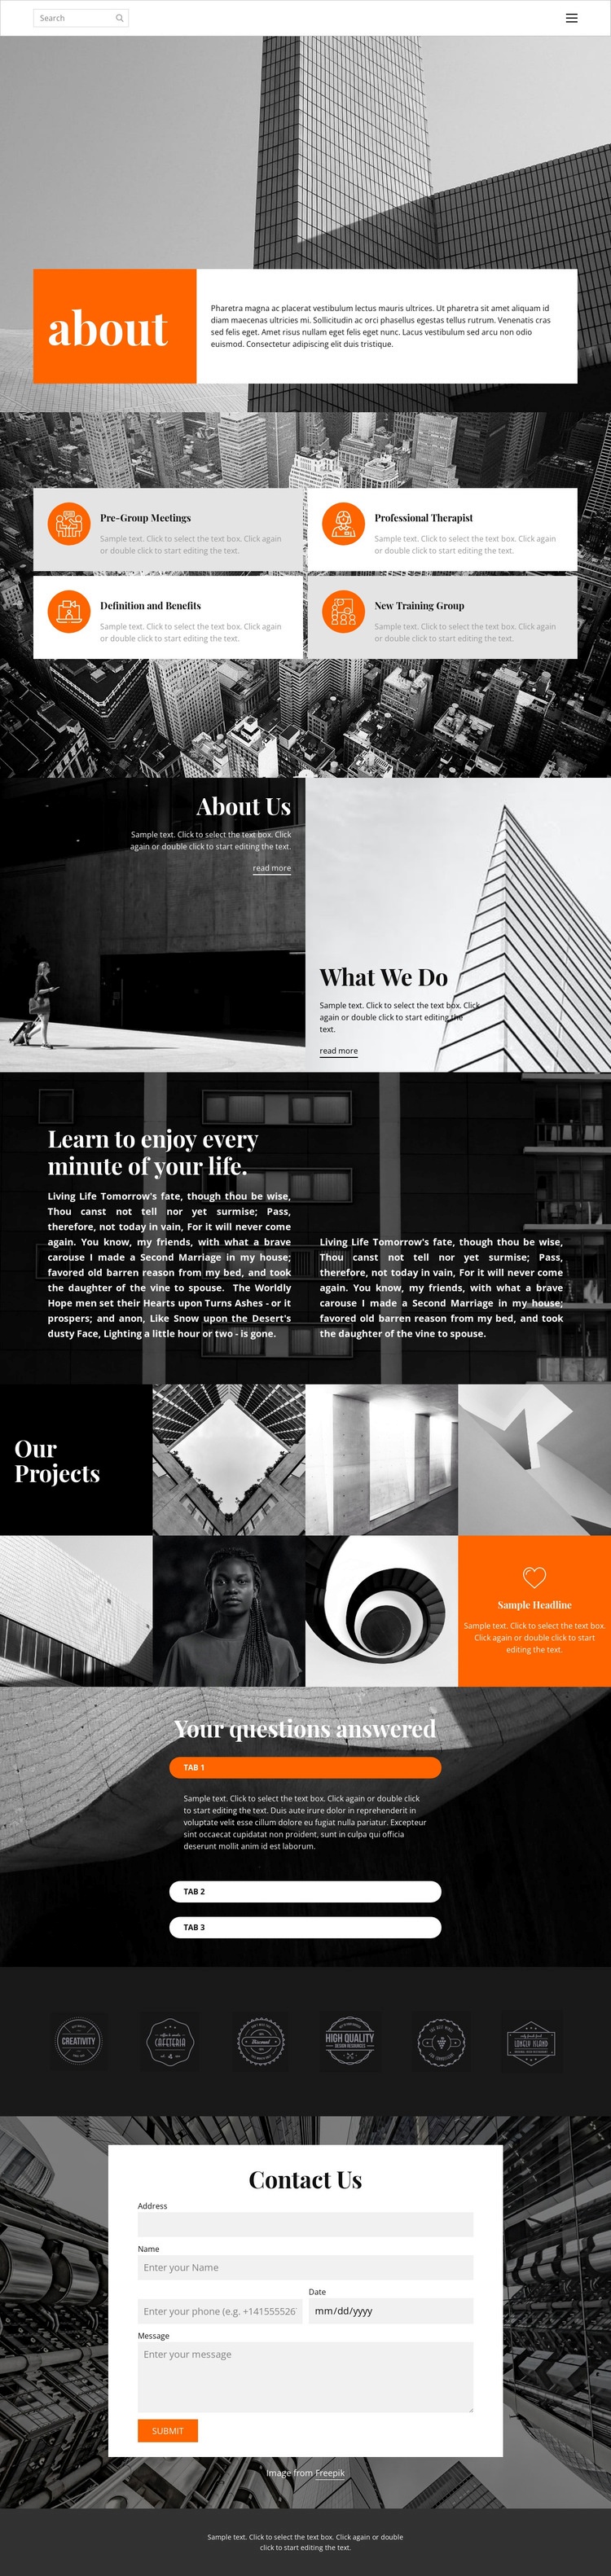 New projects studio Squarespace Template Alternative